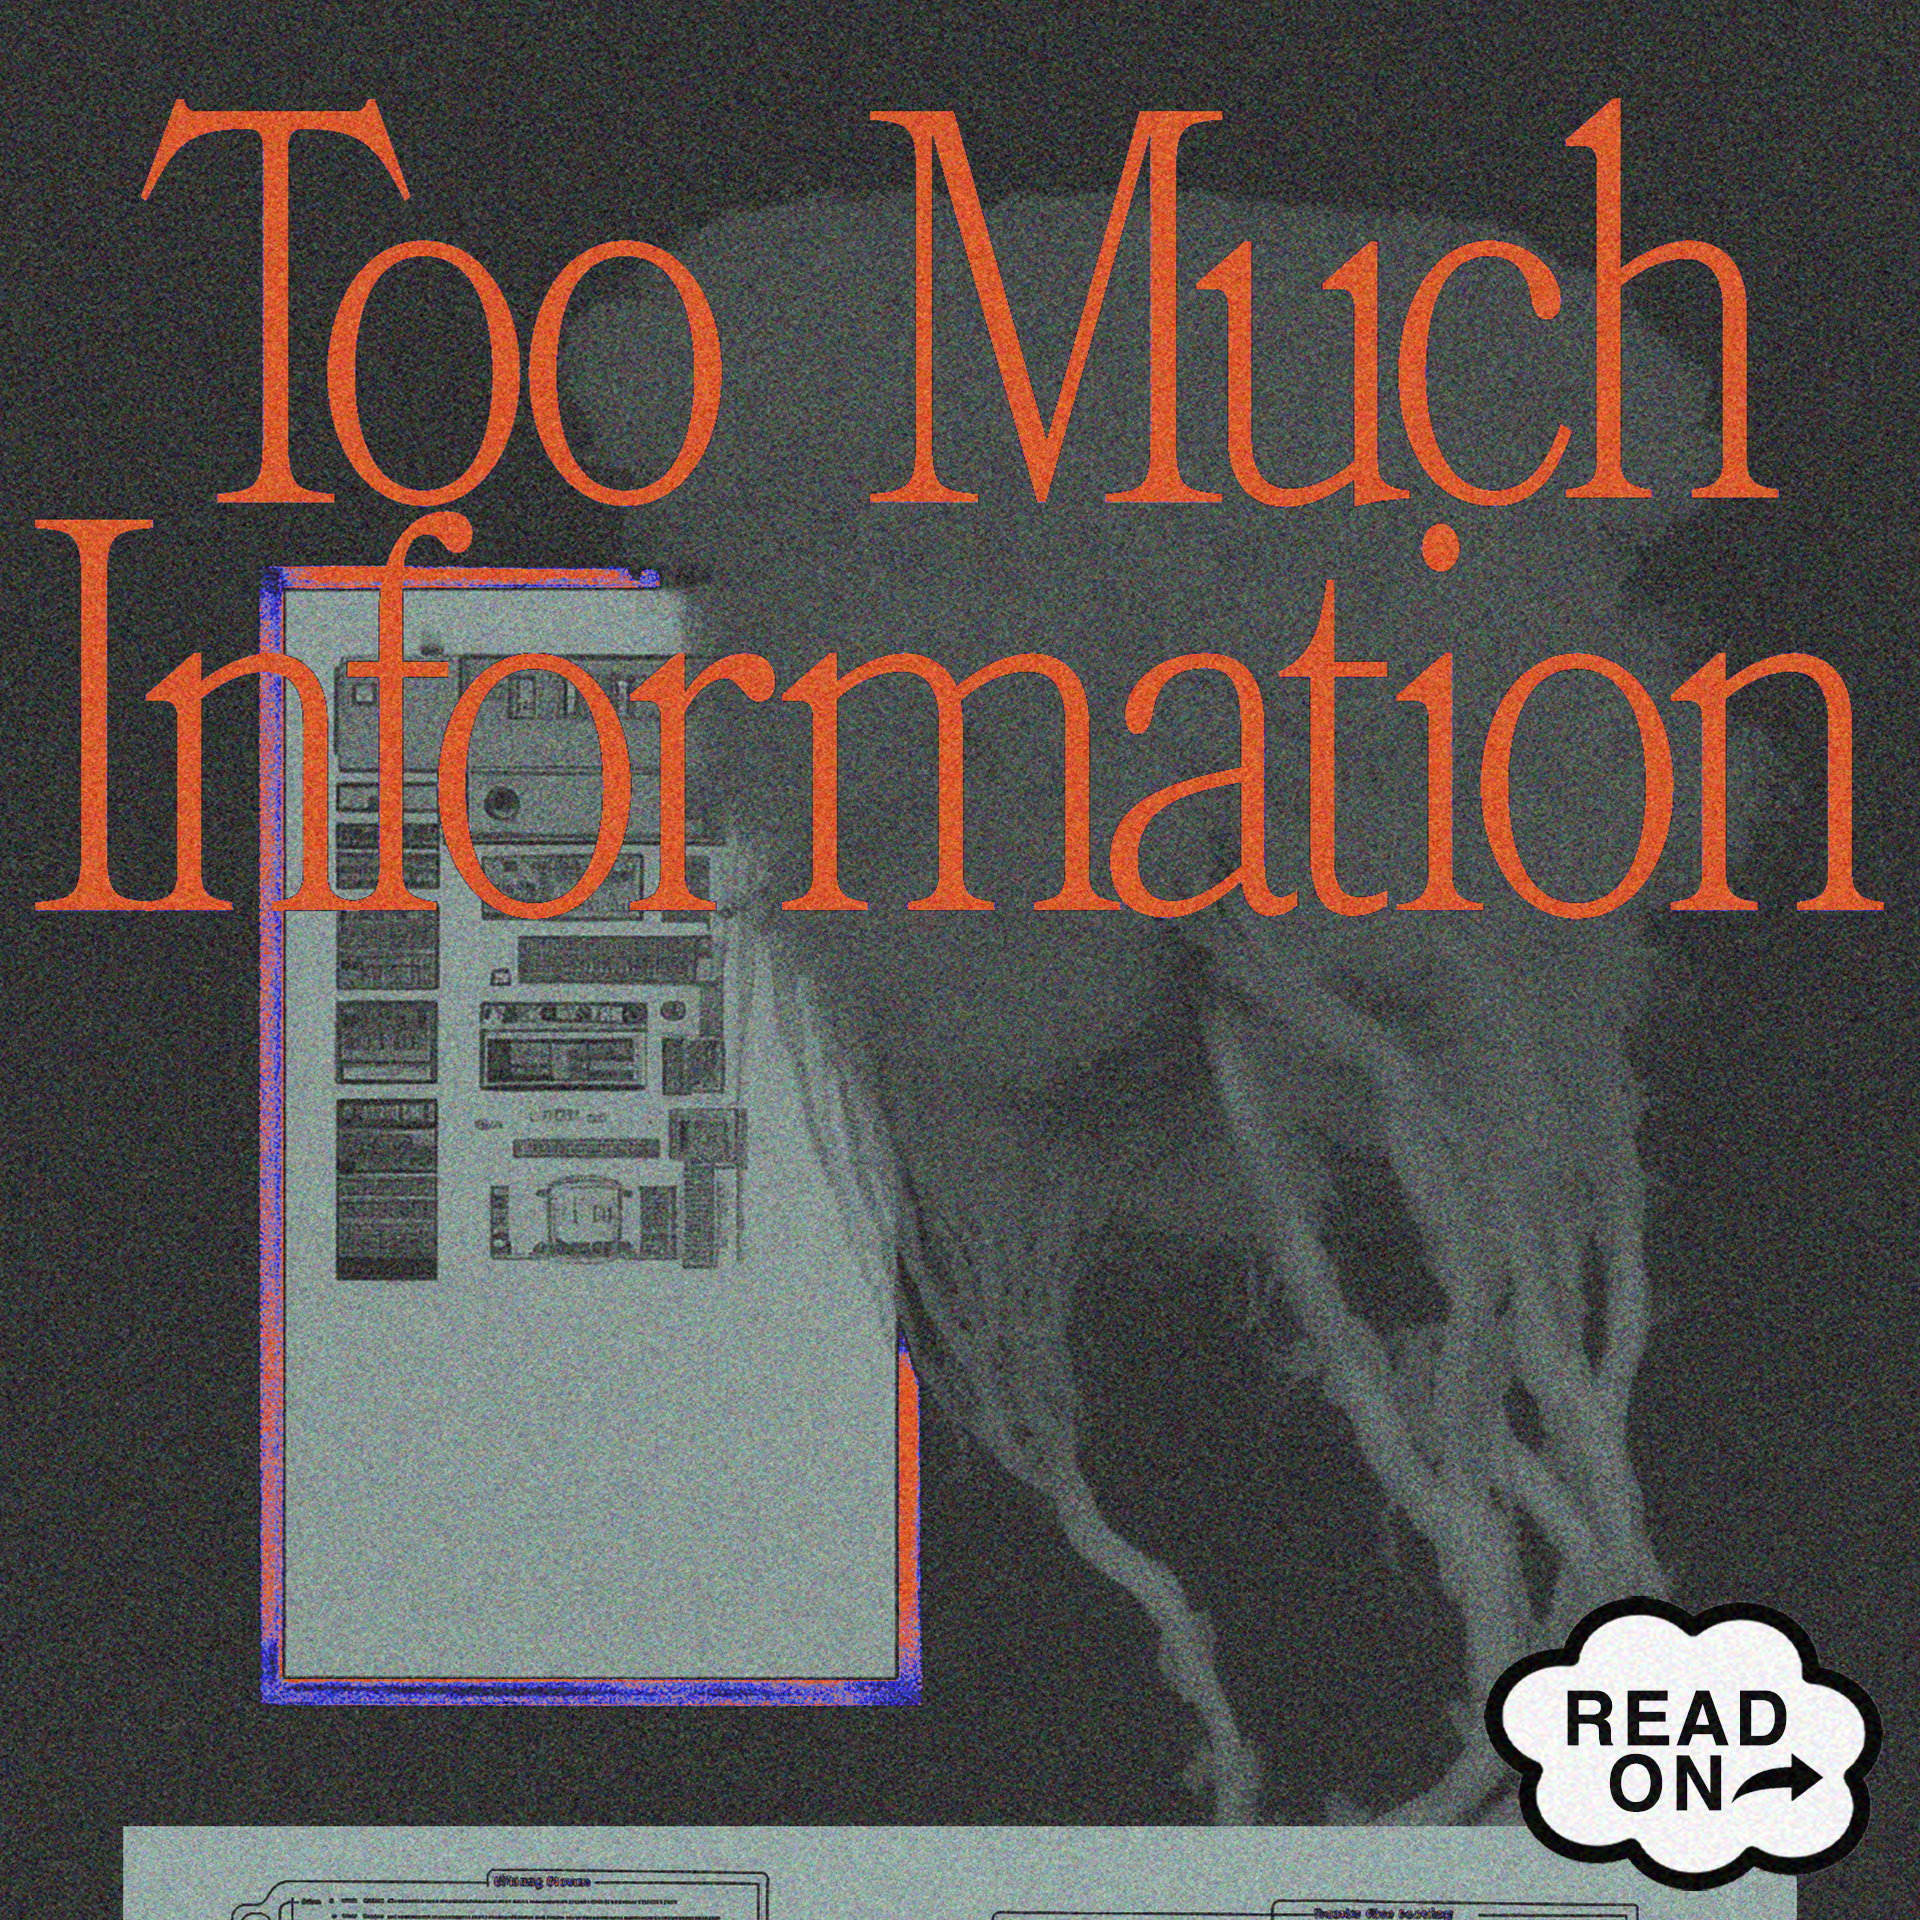 Too Much Information Image